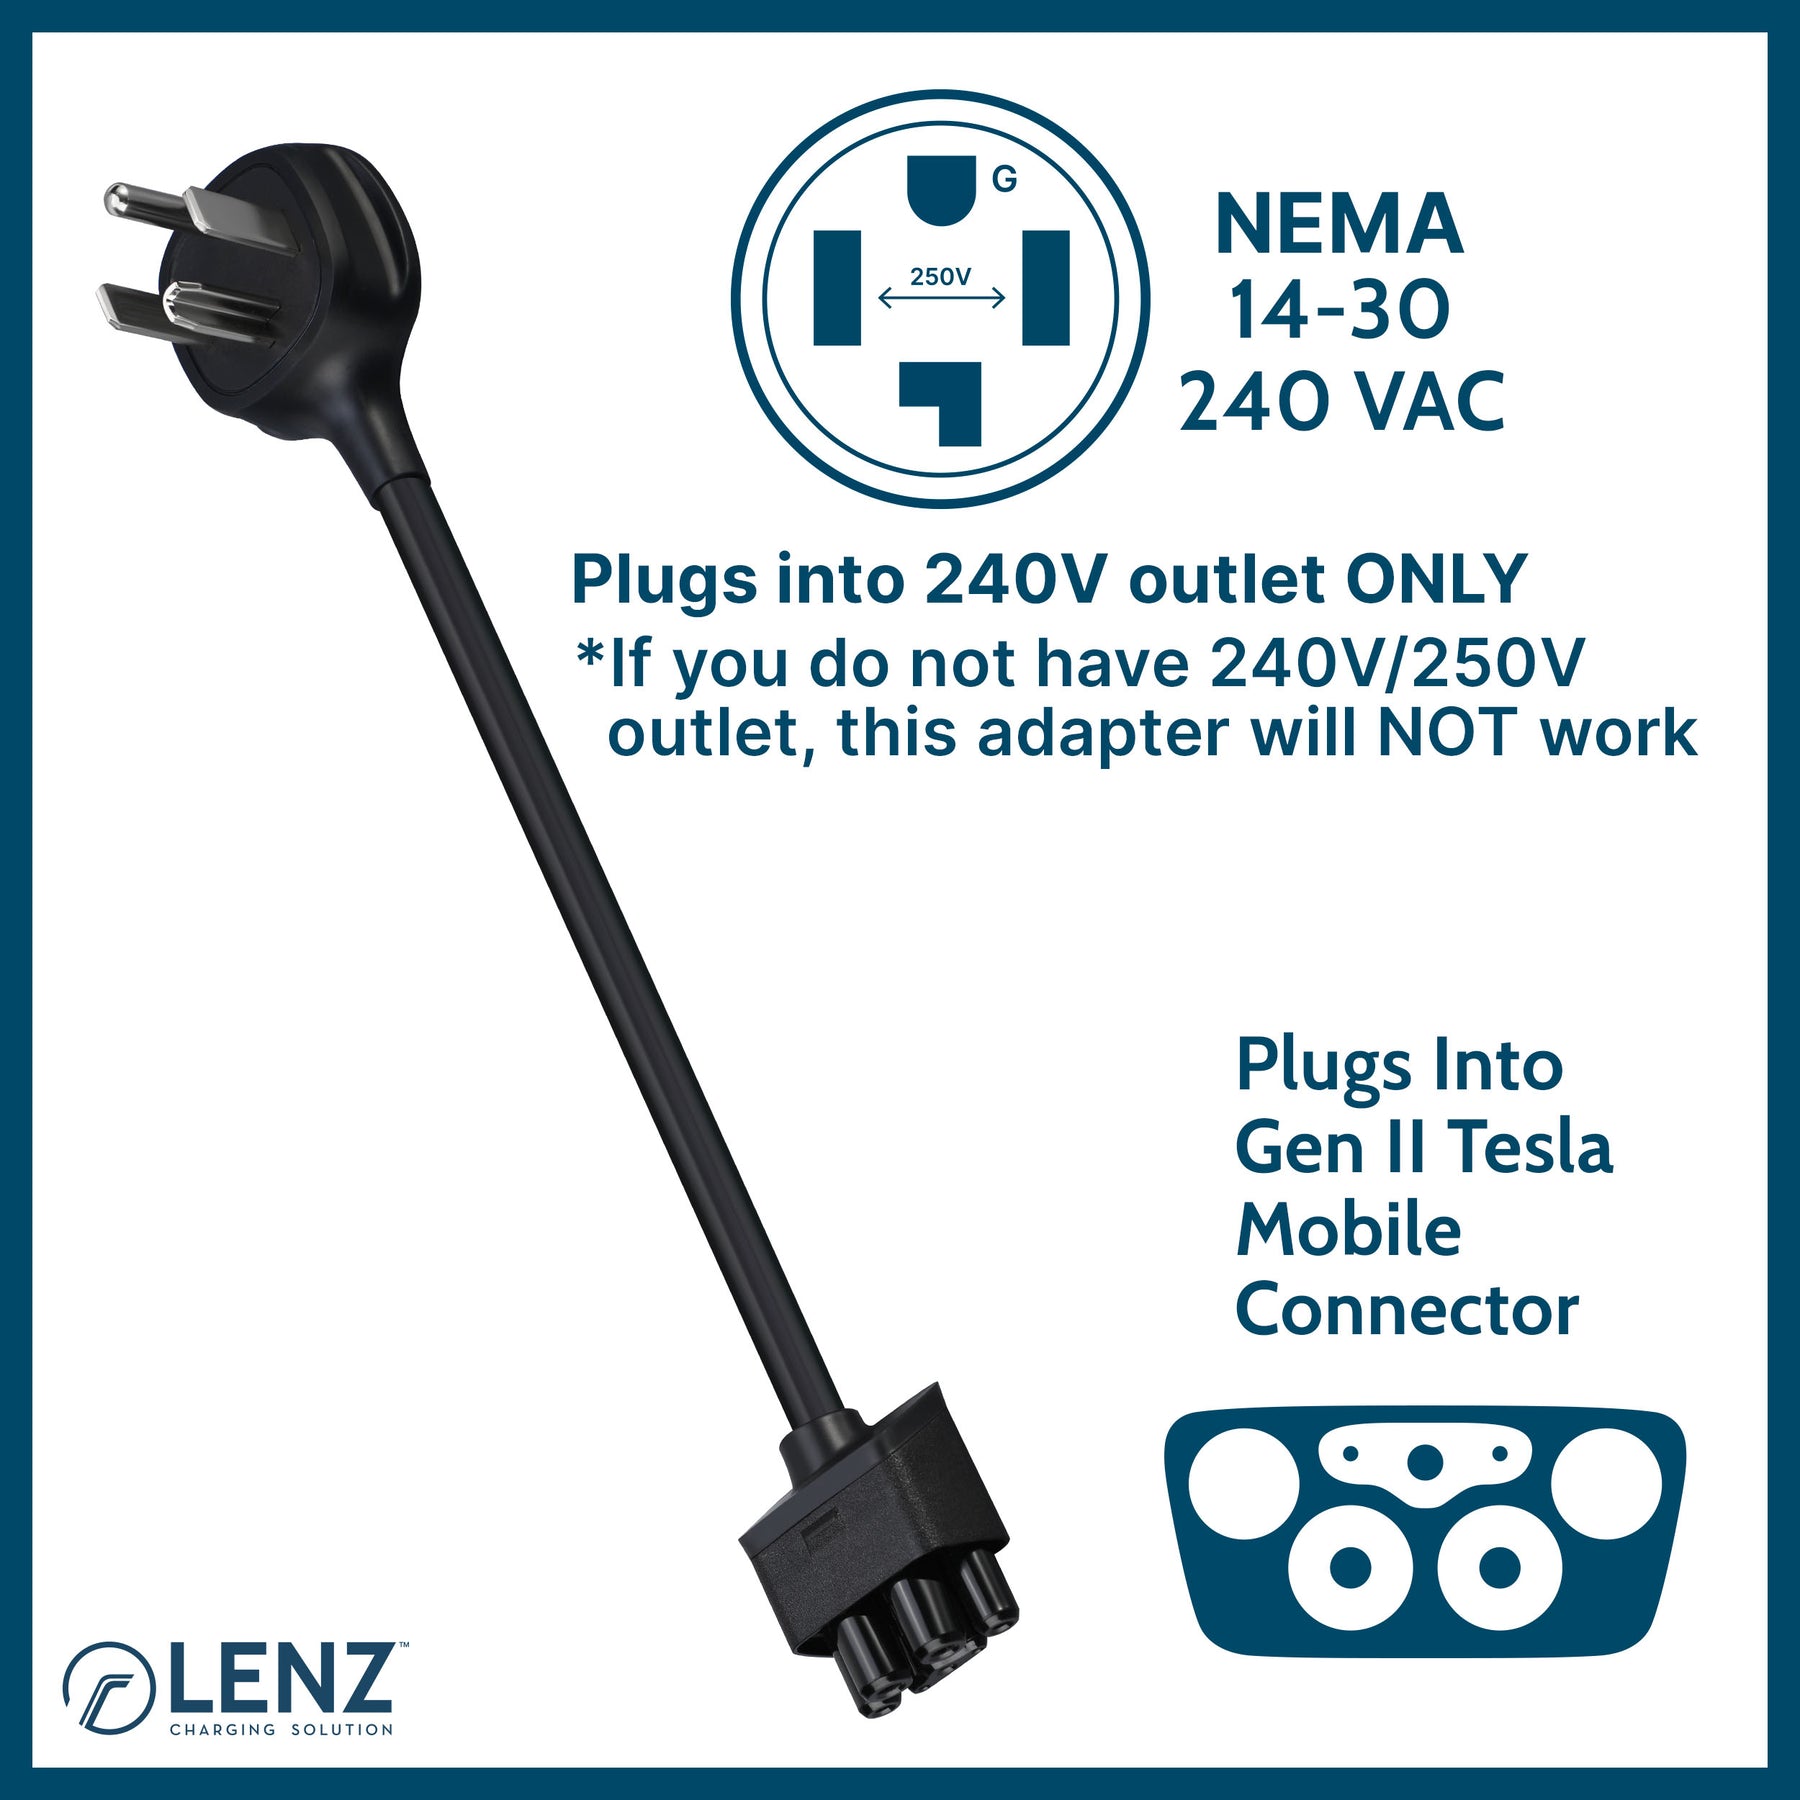 LENZ 14-30 NEMA Adapter plugs into 240v 14-30 outlet configuration and connects to Gen 2 Tesla Mobile Connector